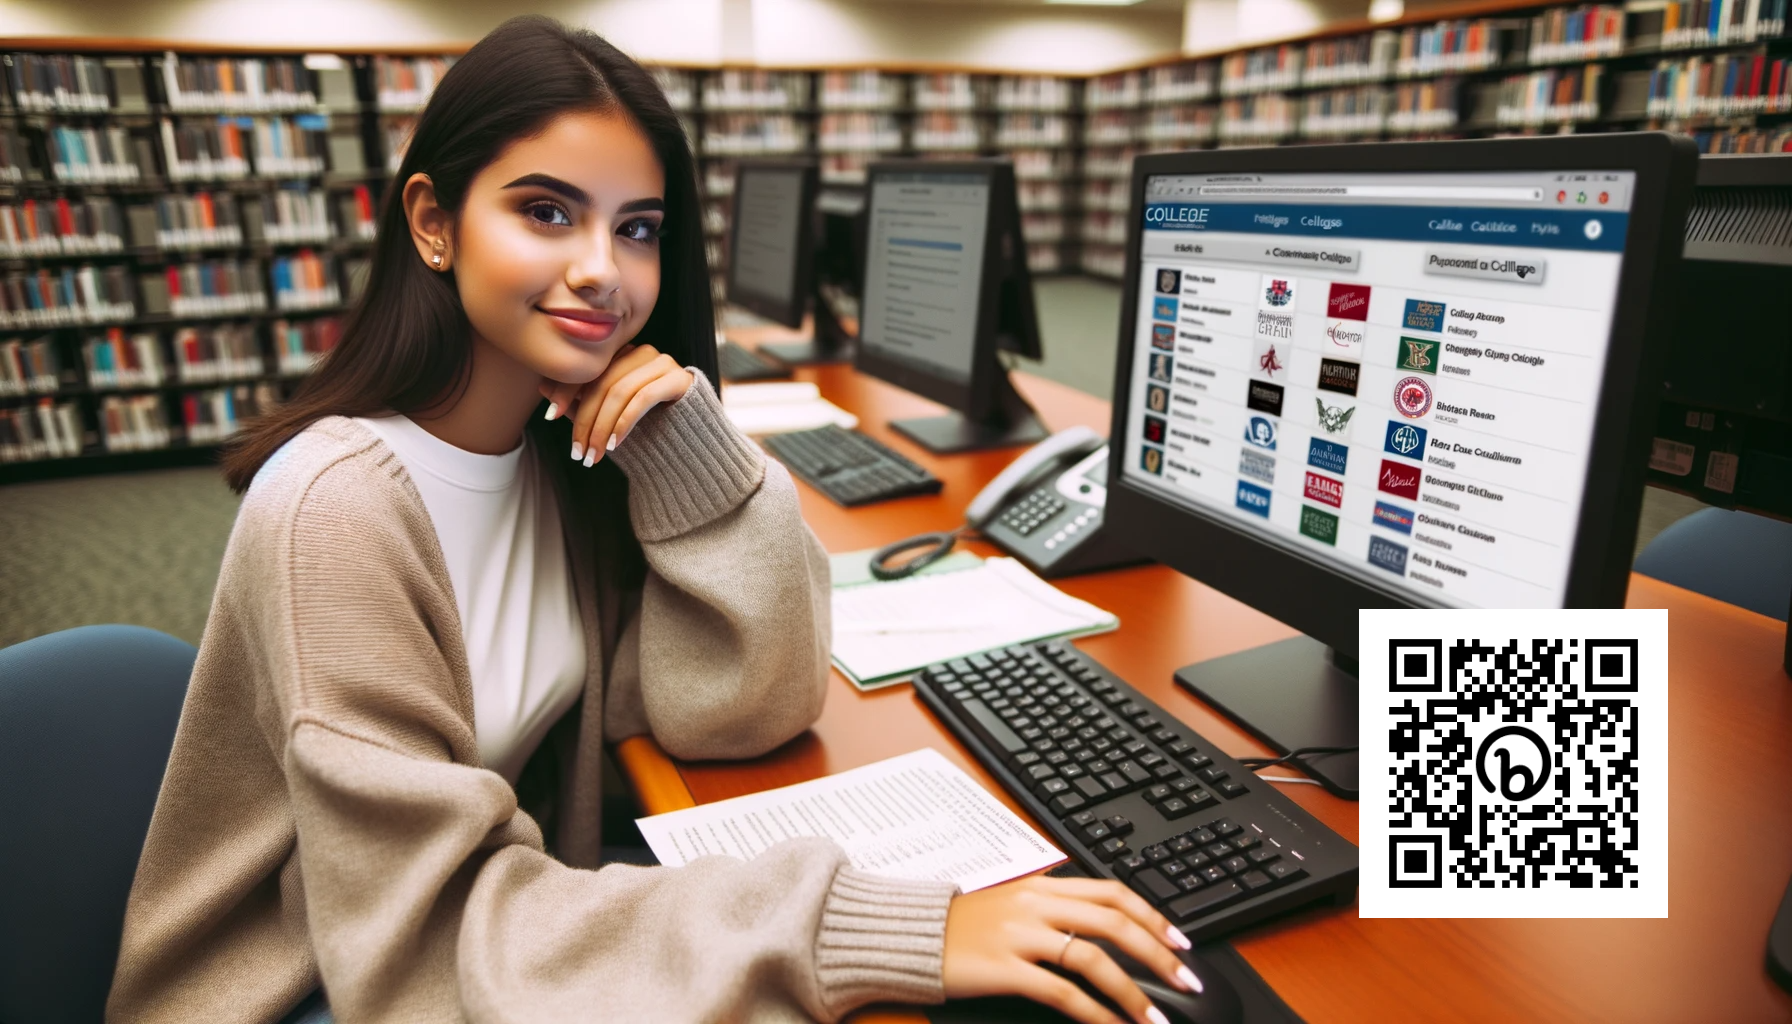 Photo of a young Hispanic woman at a library, browsing through college websites on a public computer. She has a list of colleges written on a piece of paper.